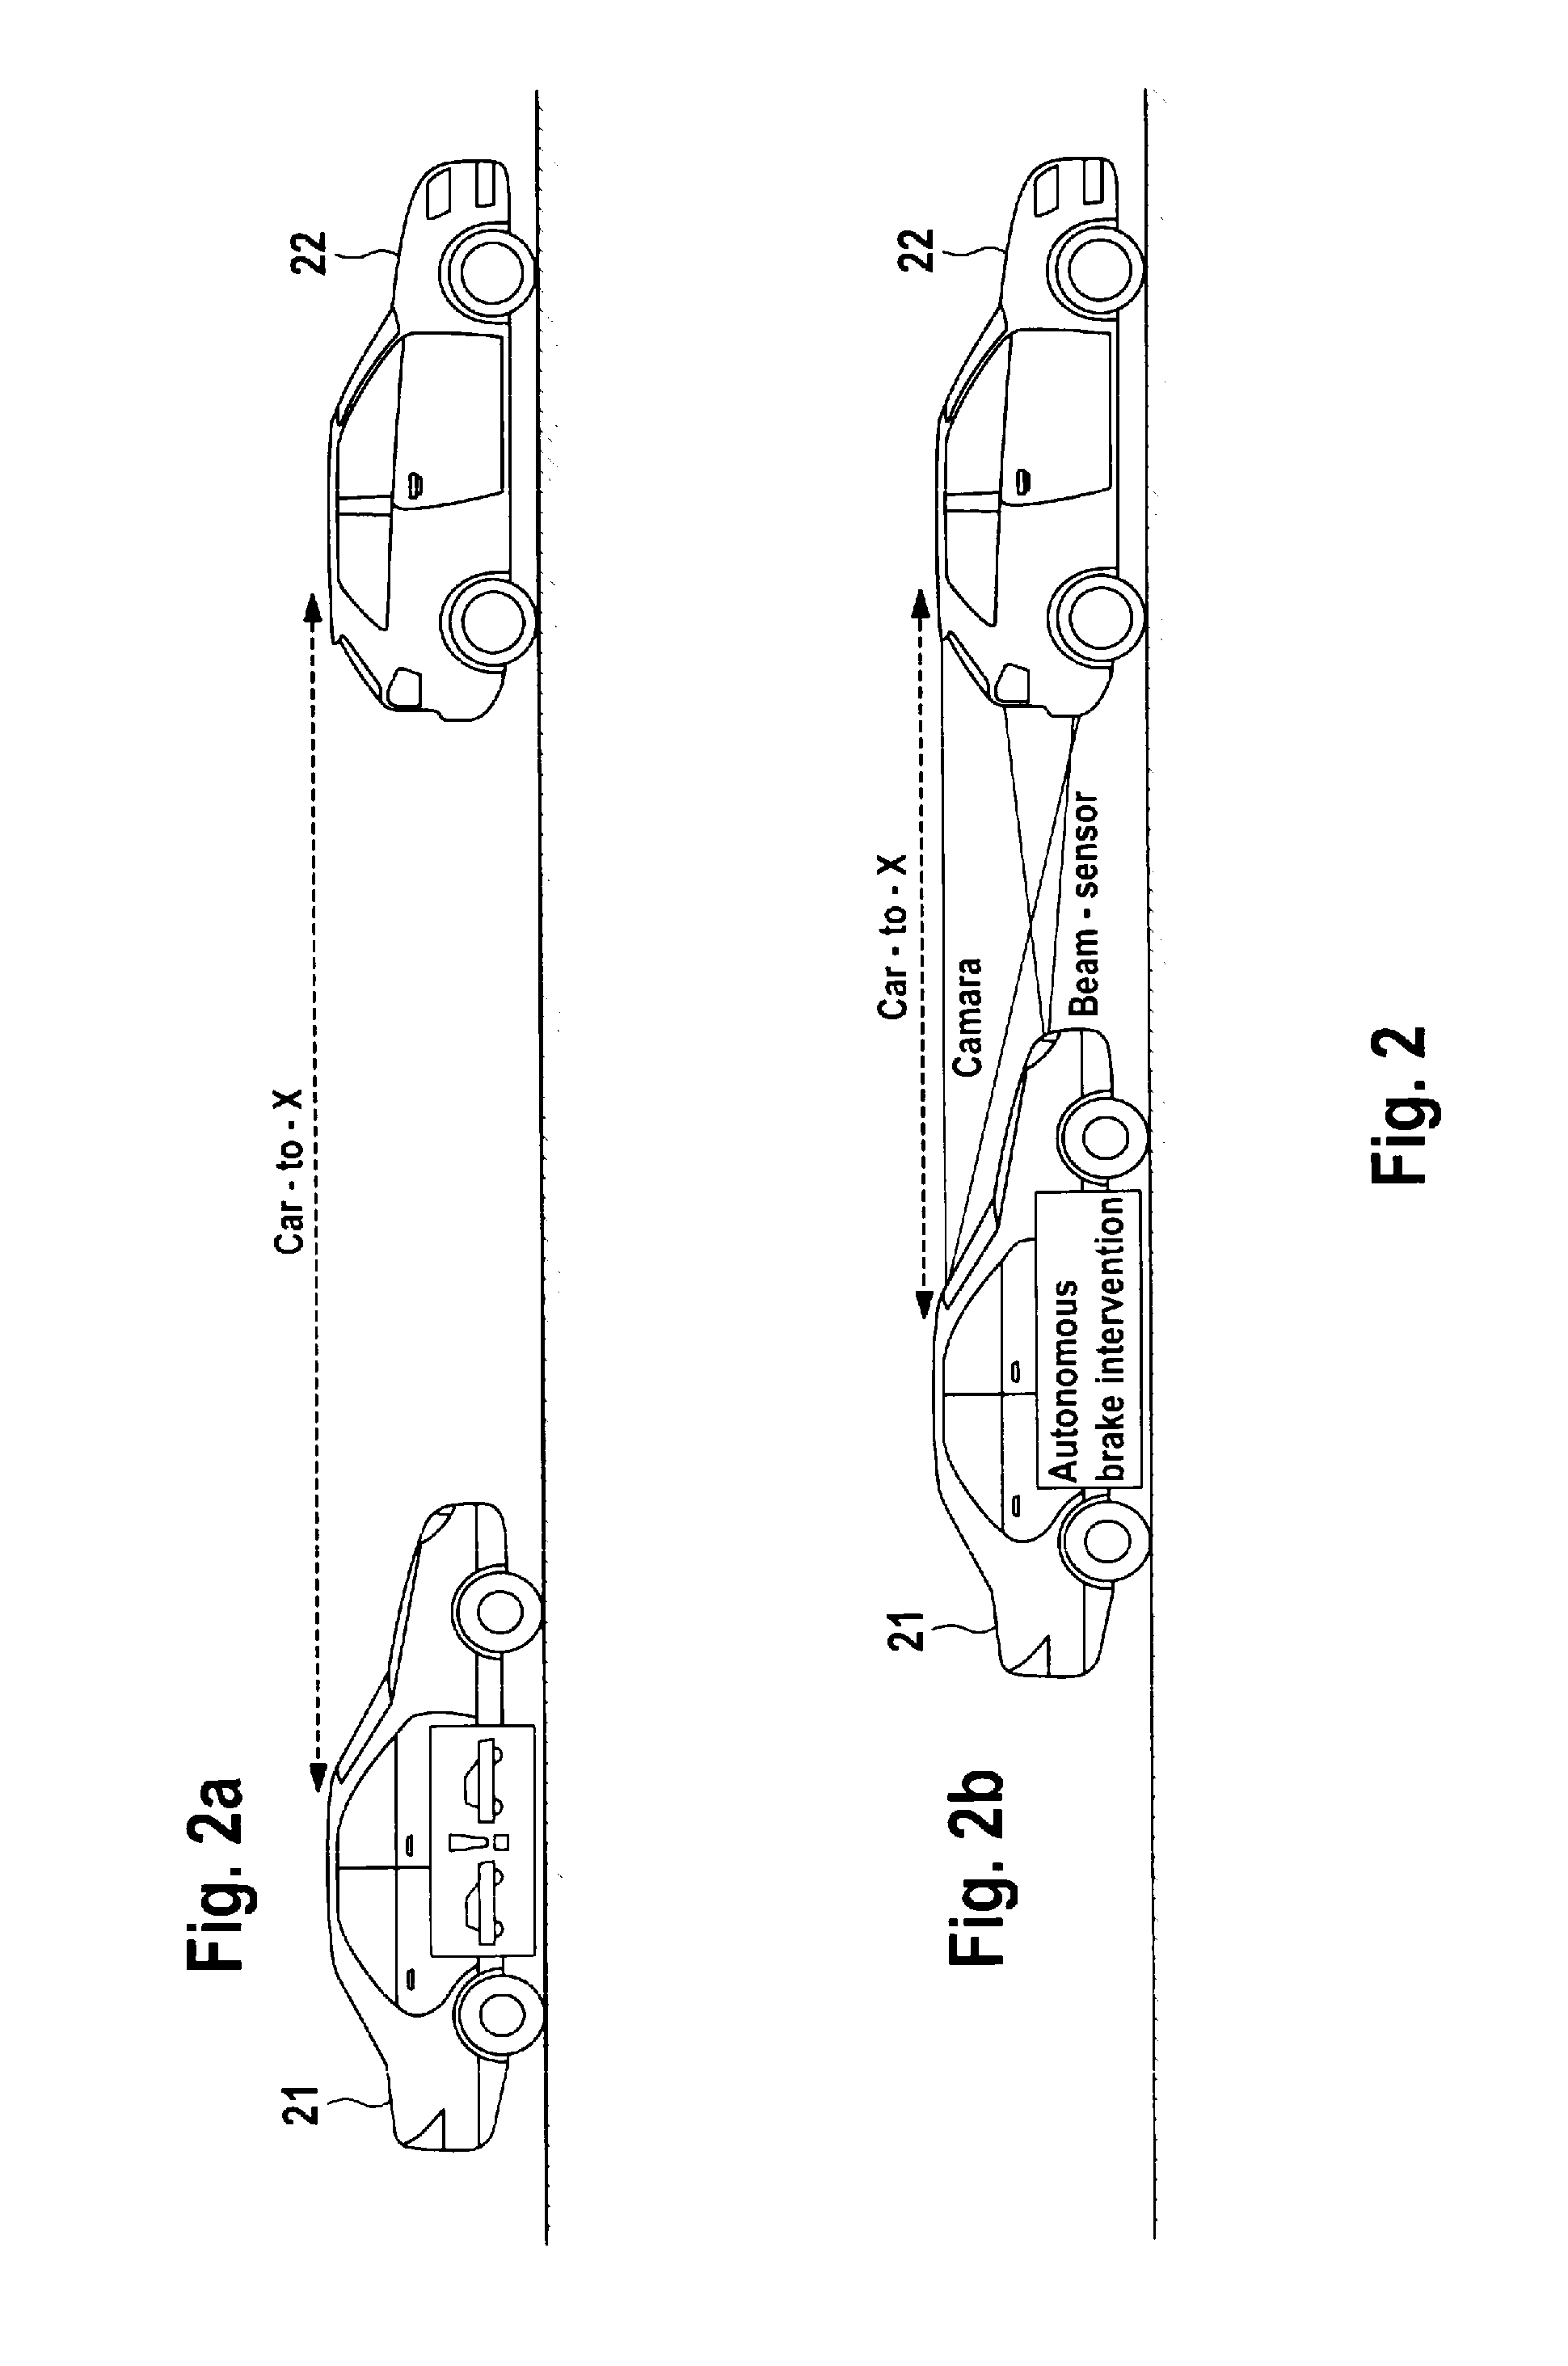 Method and System for Accelerated Object Recognition and/or Accelerated Object Attribute Recognition and Use of Said Method